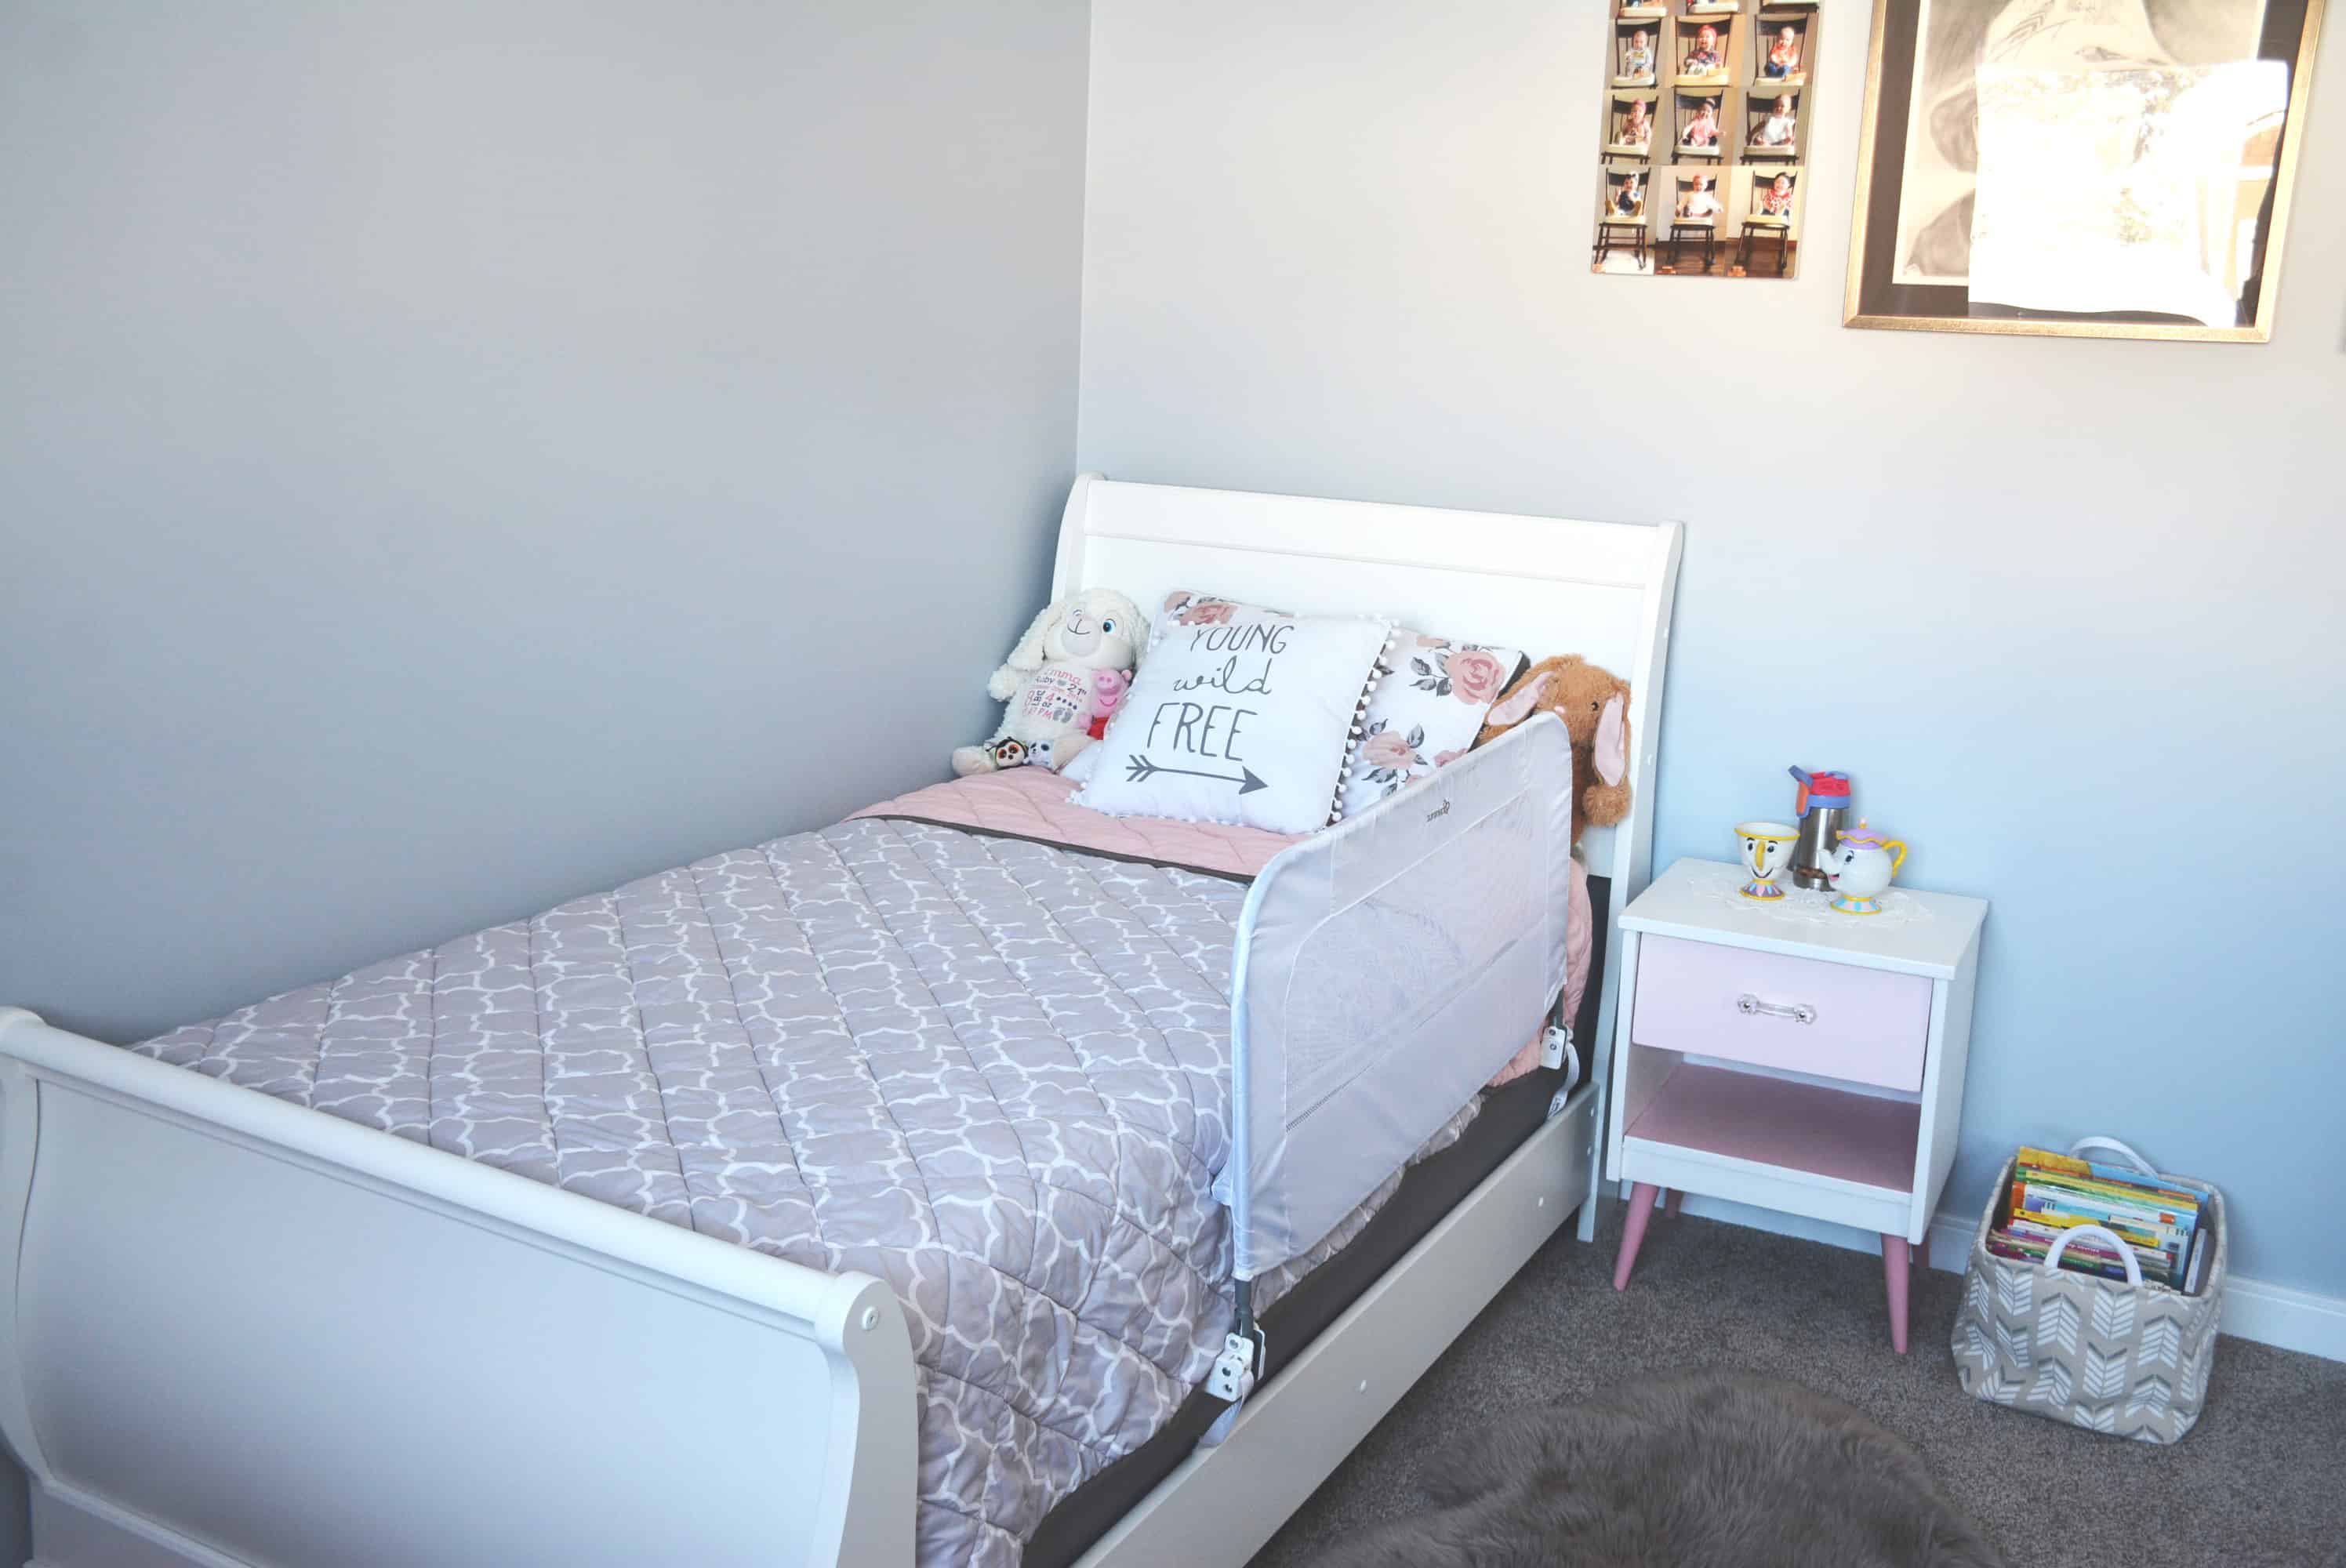 A Quick DIY Guide on How to Renovate a Bedroom - Sew Bright Creations